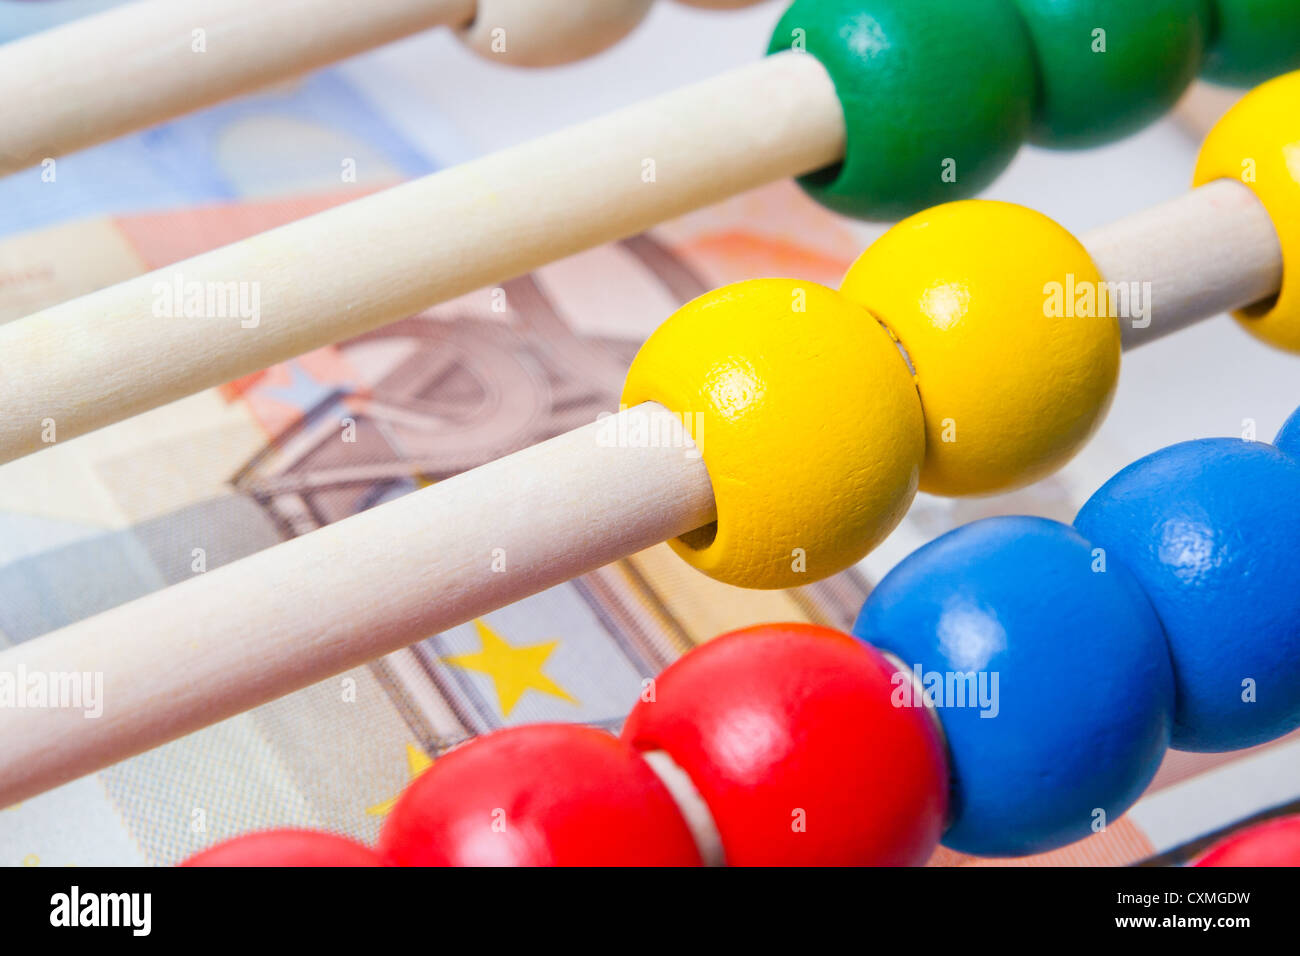 Education concept - Abacus with many colorful beads and banknotes in background Stock Photo